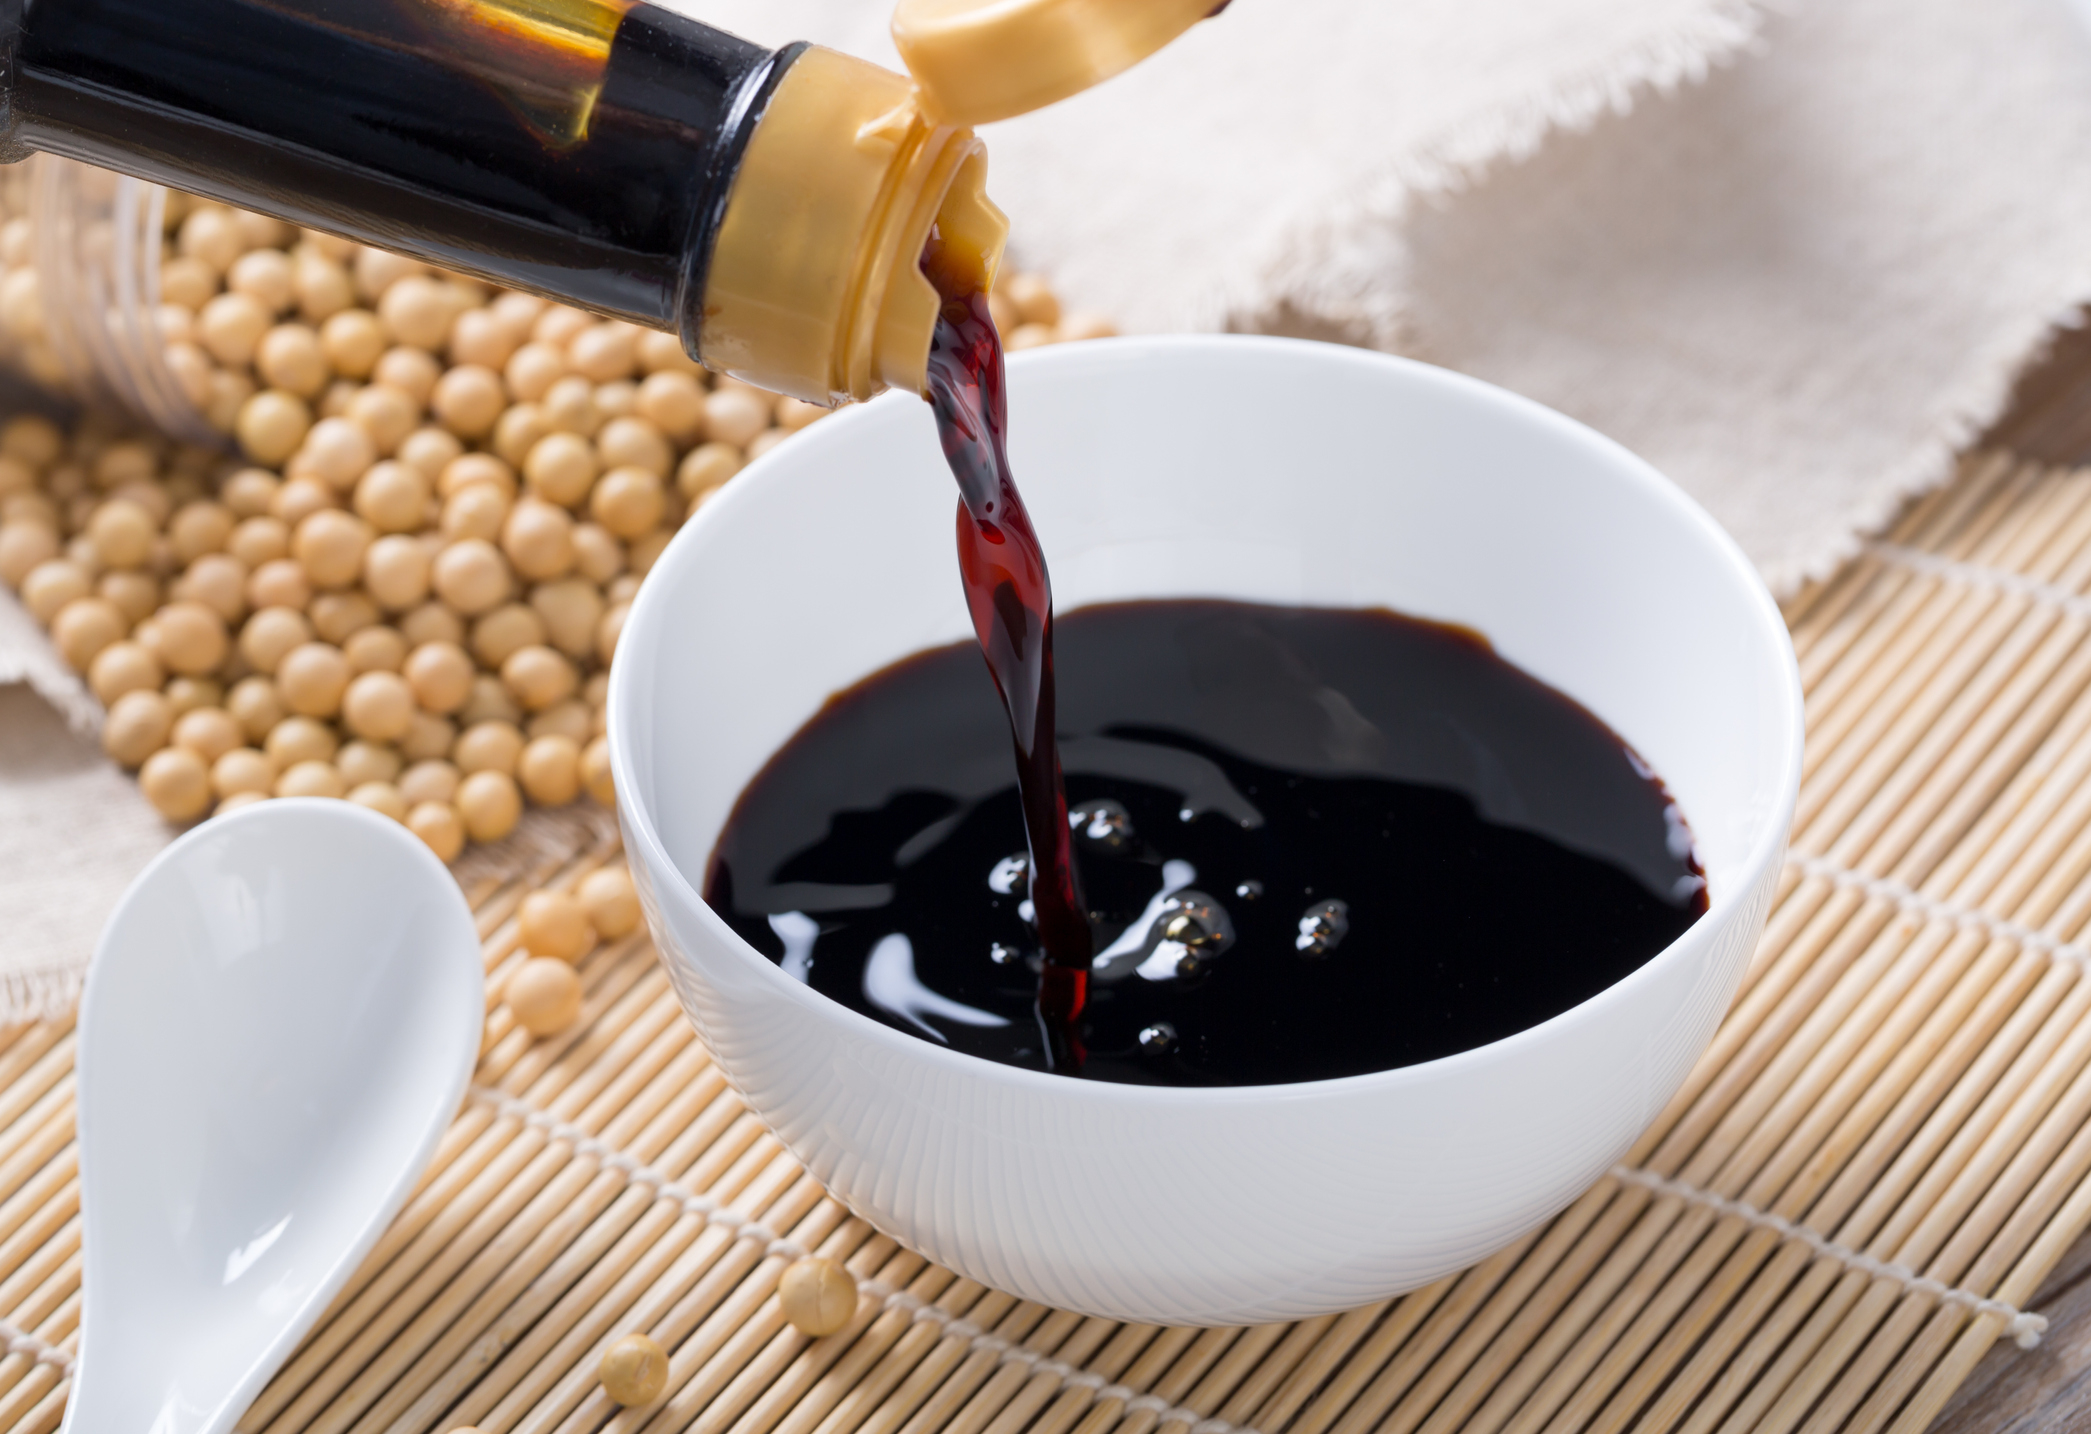 soy sauce being poured into a small bowl